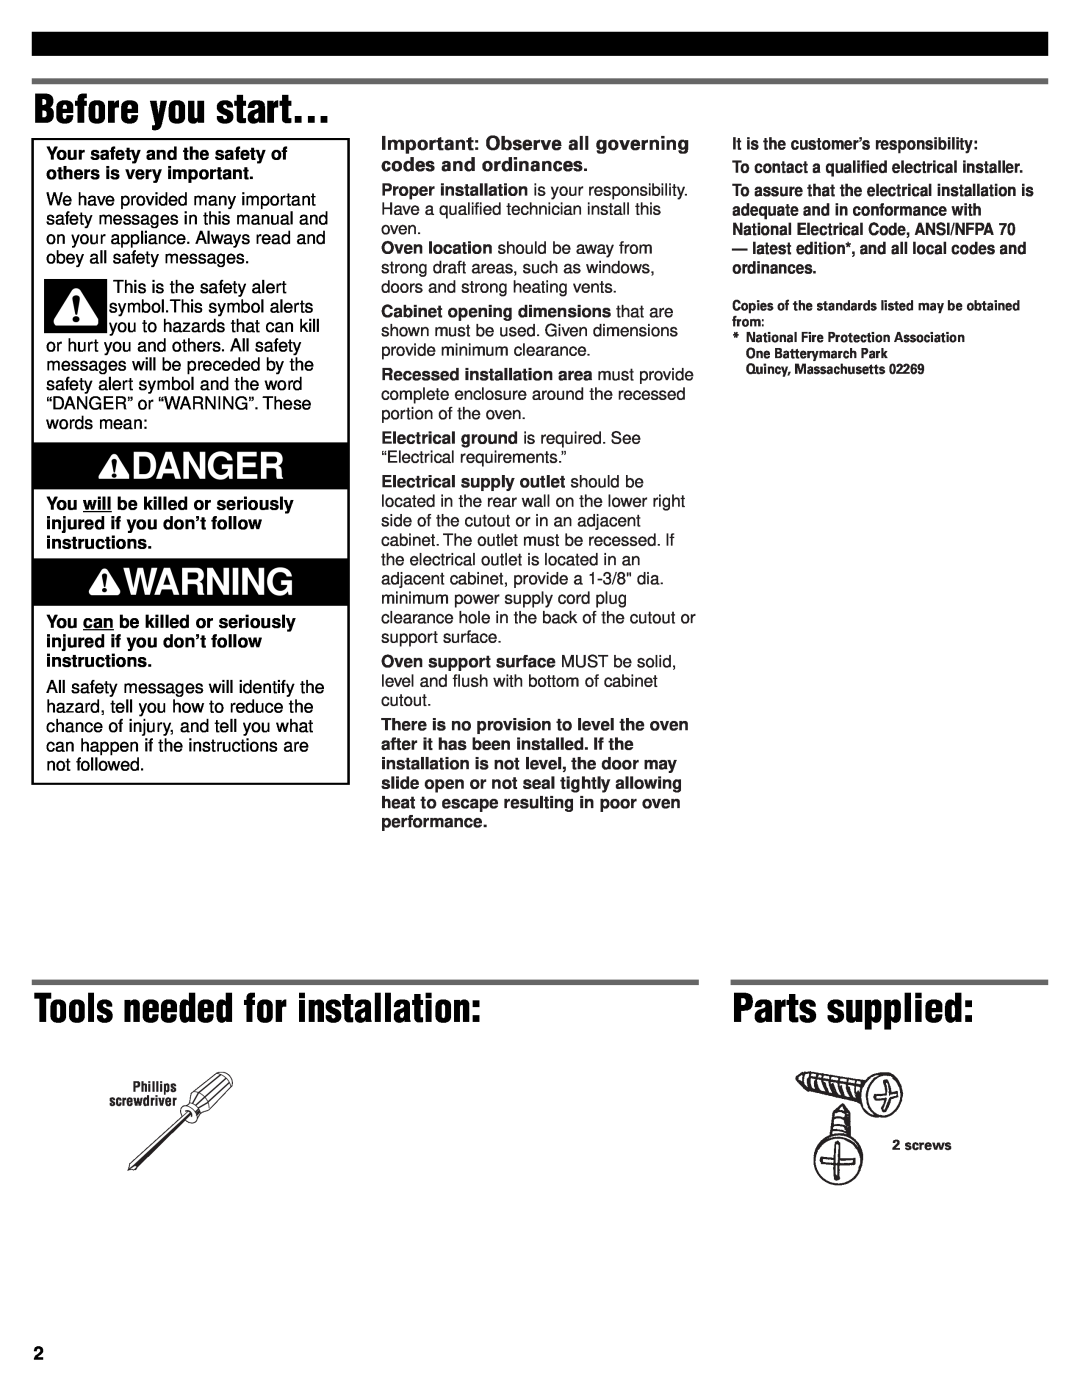 KitchenAid 4452828 installation instructions Before you start, Tools needed for installation, Danger, Parts supplied 